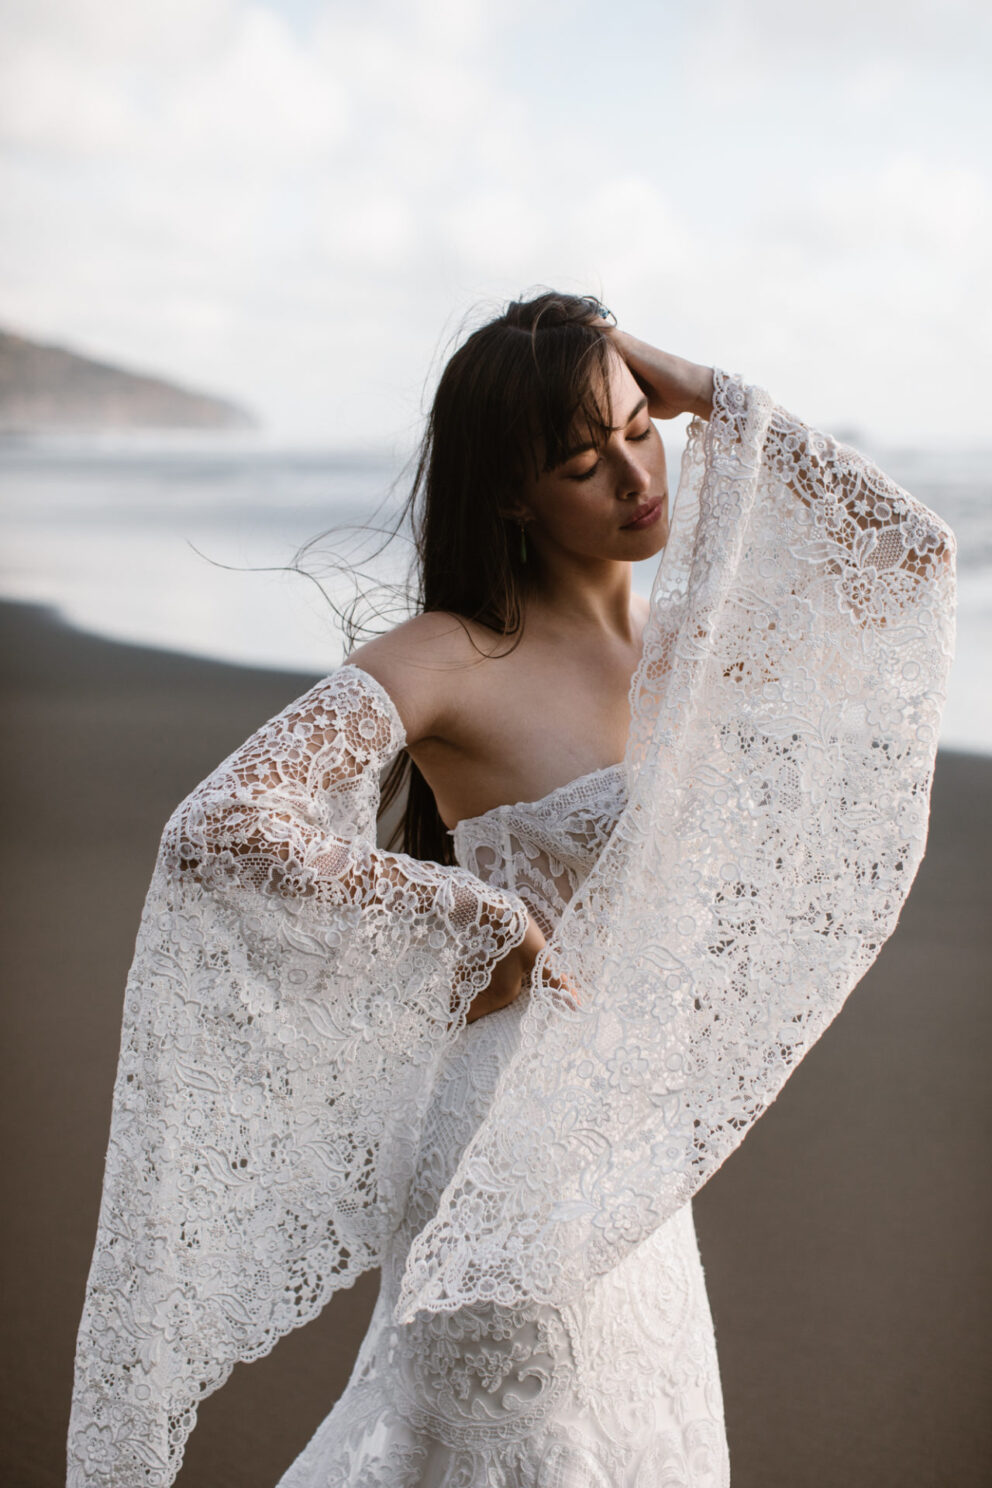 These beautiful bohemian long sleeves enhance any strapless gown. The sheer lace brings the free and natural feel to your wedding day.